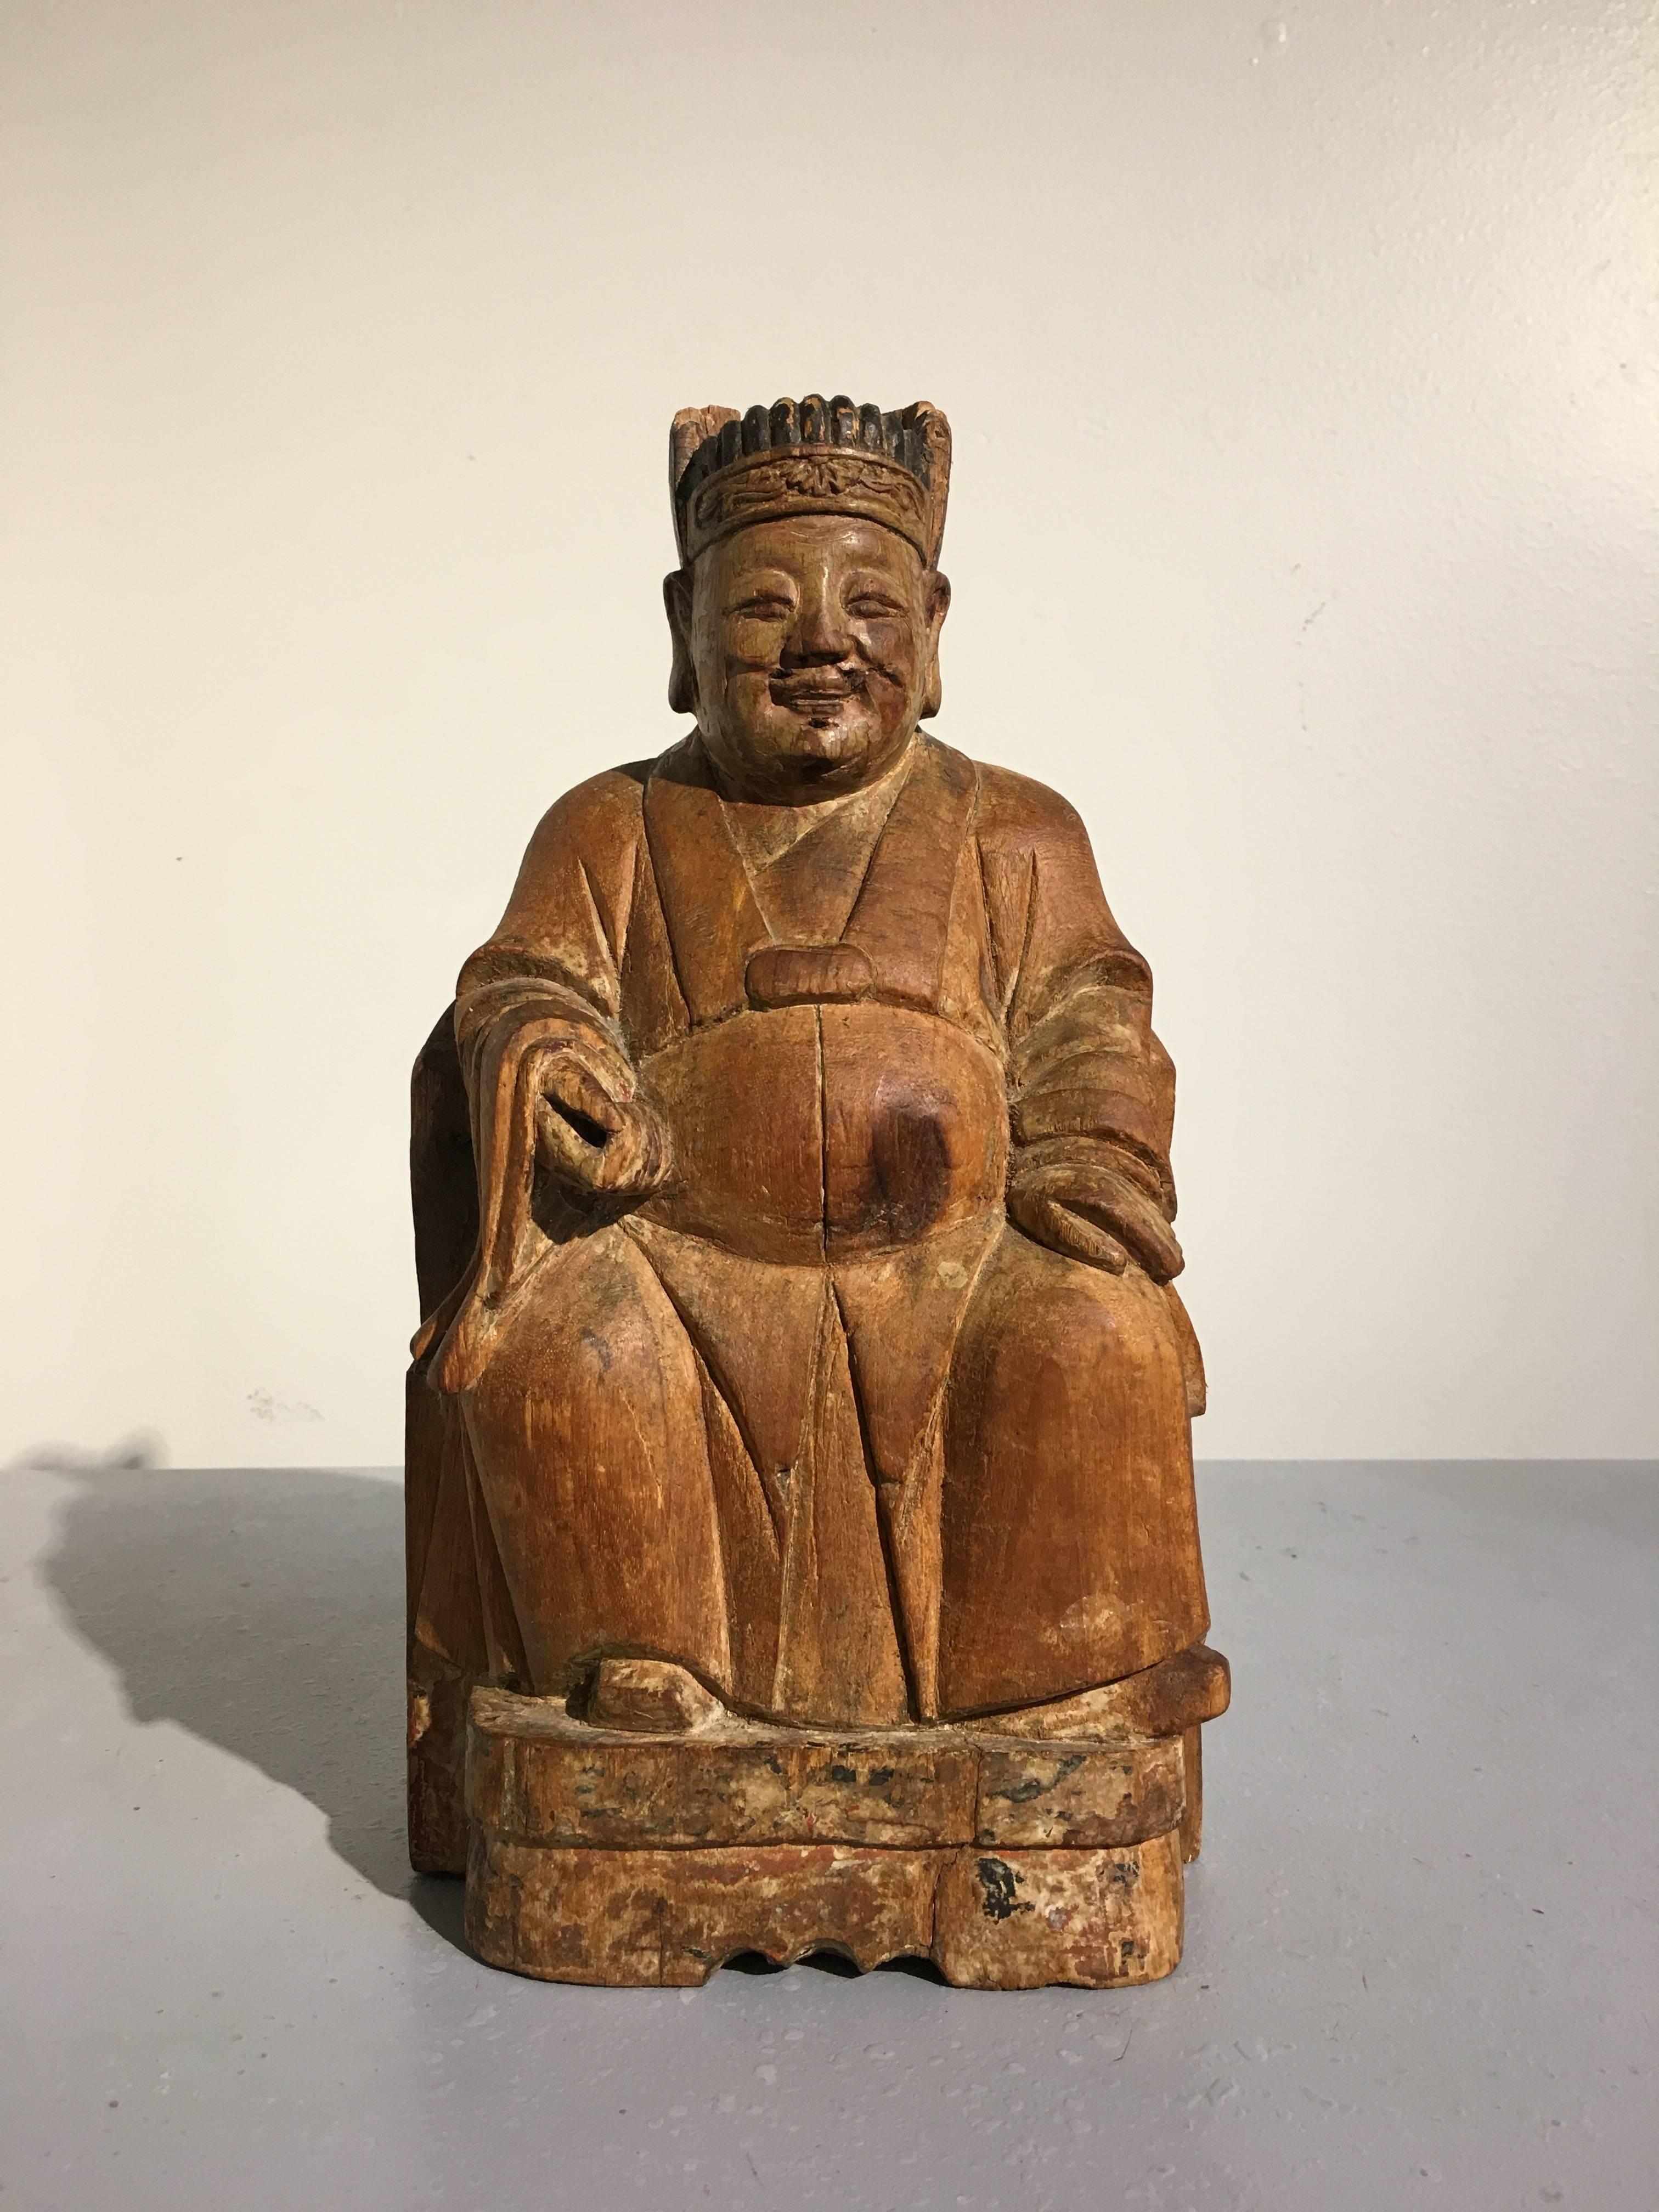 A charming late Ming dynasty Chinese carved camphor wood figure of the God of Wealth, named Caishen, mid-17th century. 
Carved from a single block of still fragrant camphor wood, Caishen, the god of wealth and prosperity, is portrayed seated upon a